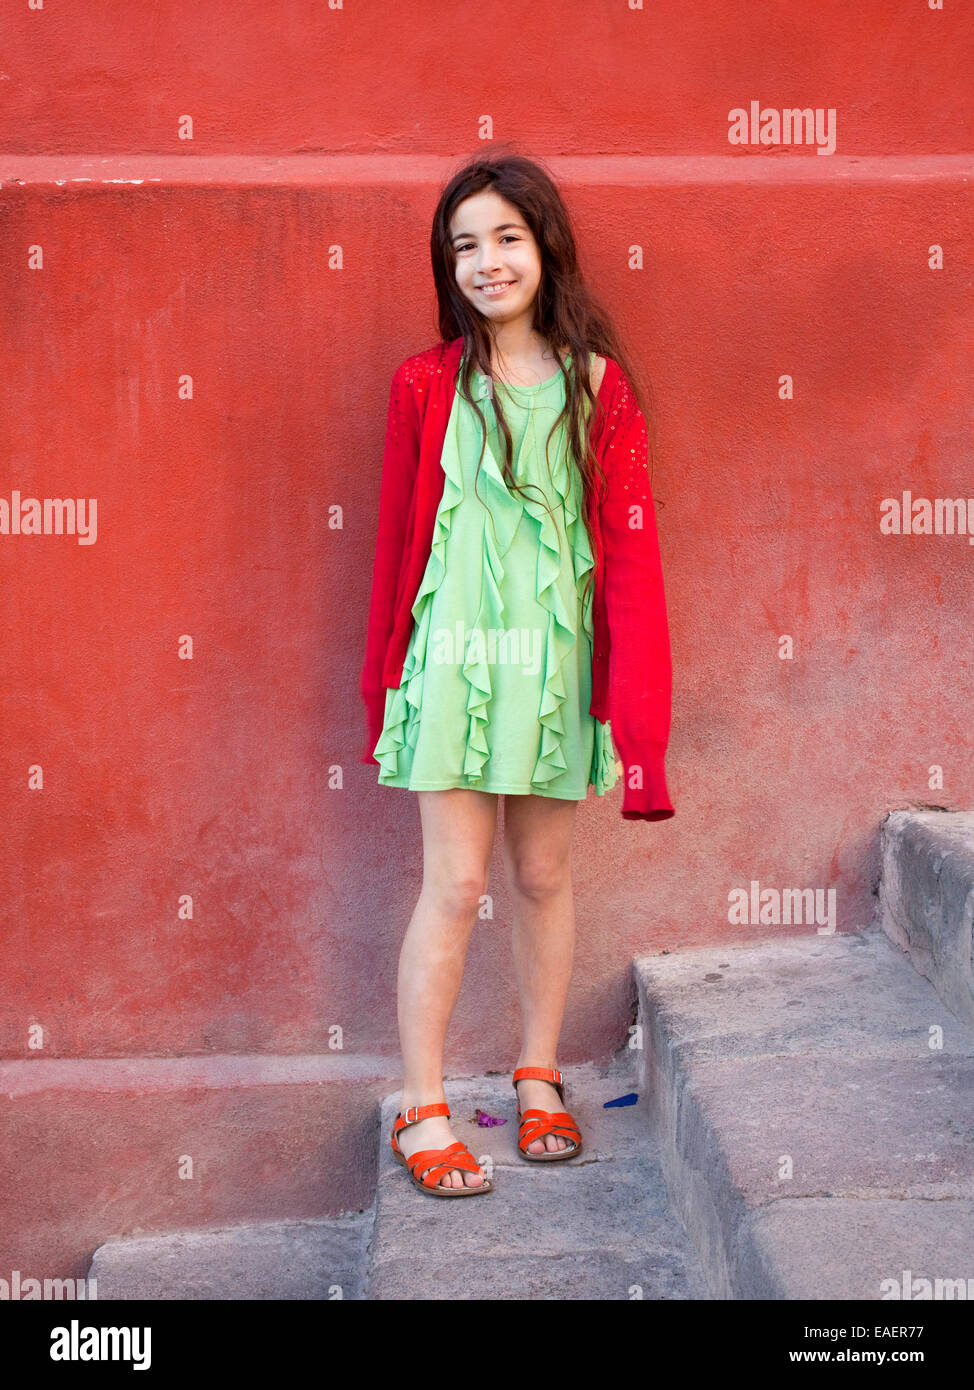 portrait of colorfully dressed young girl Stock Photo